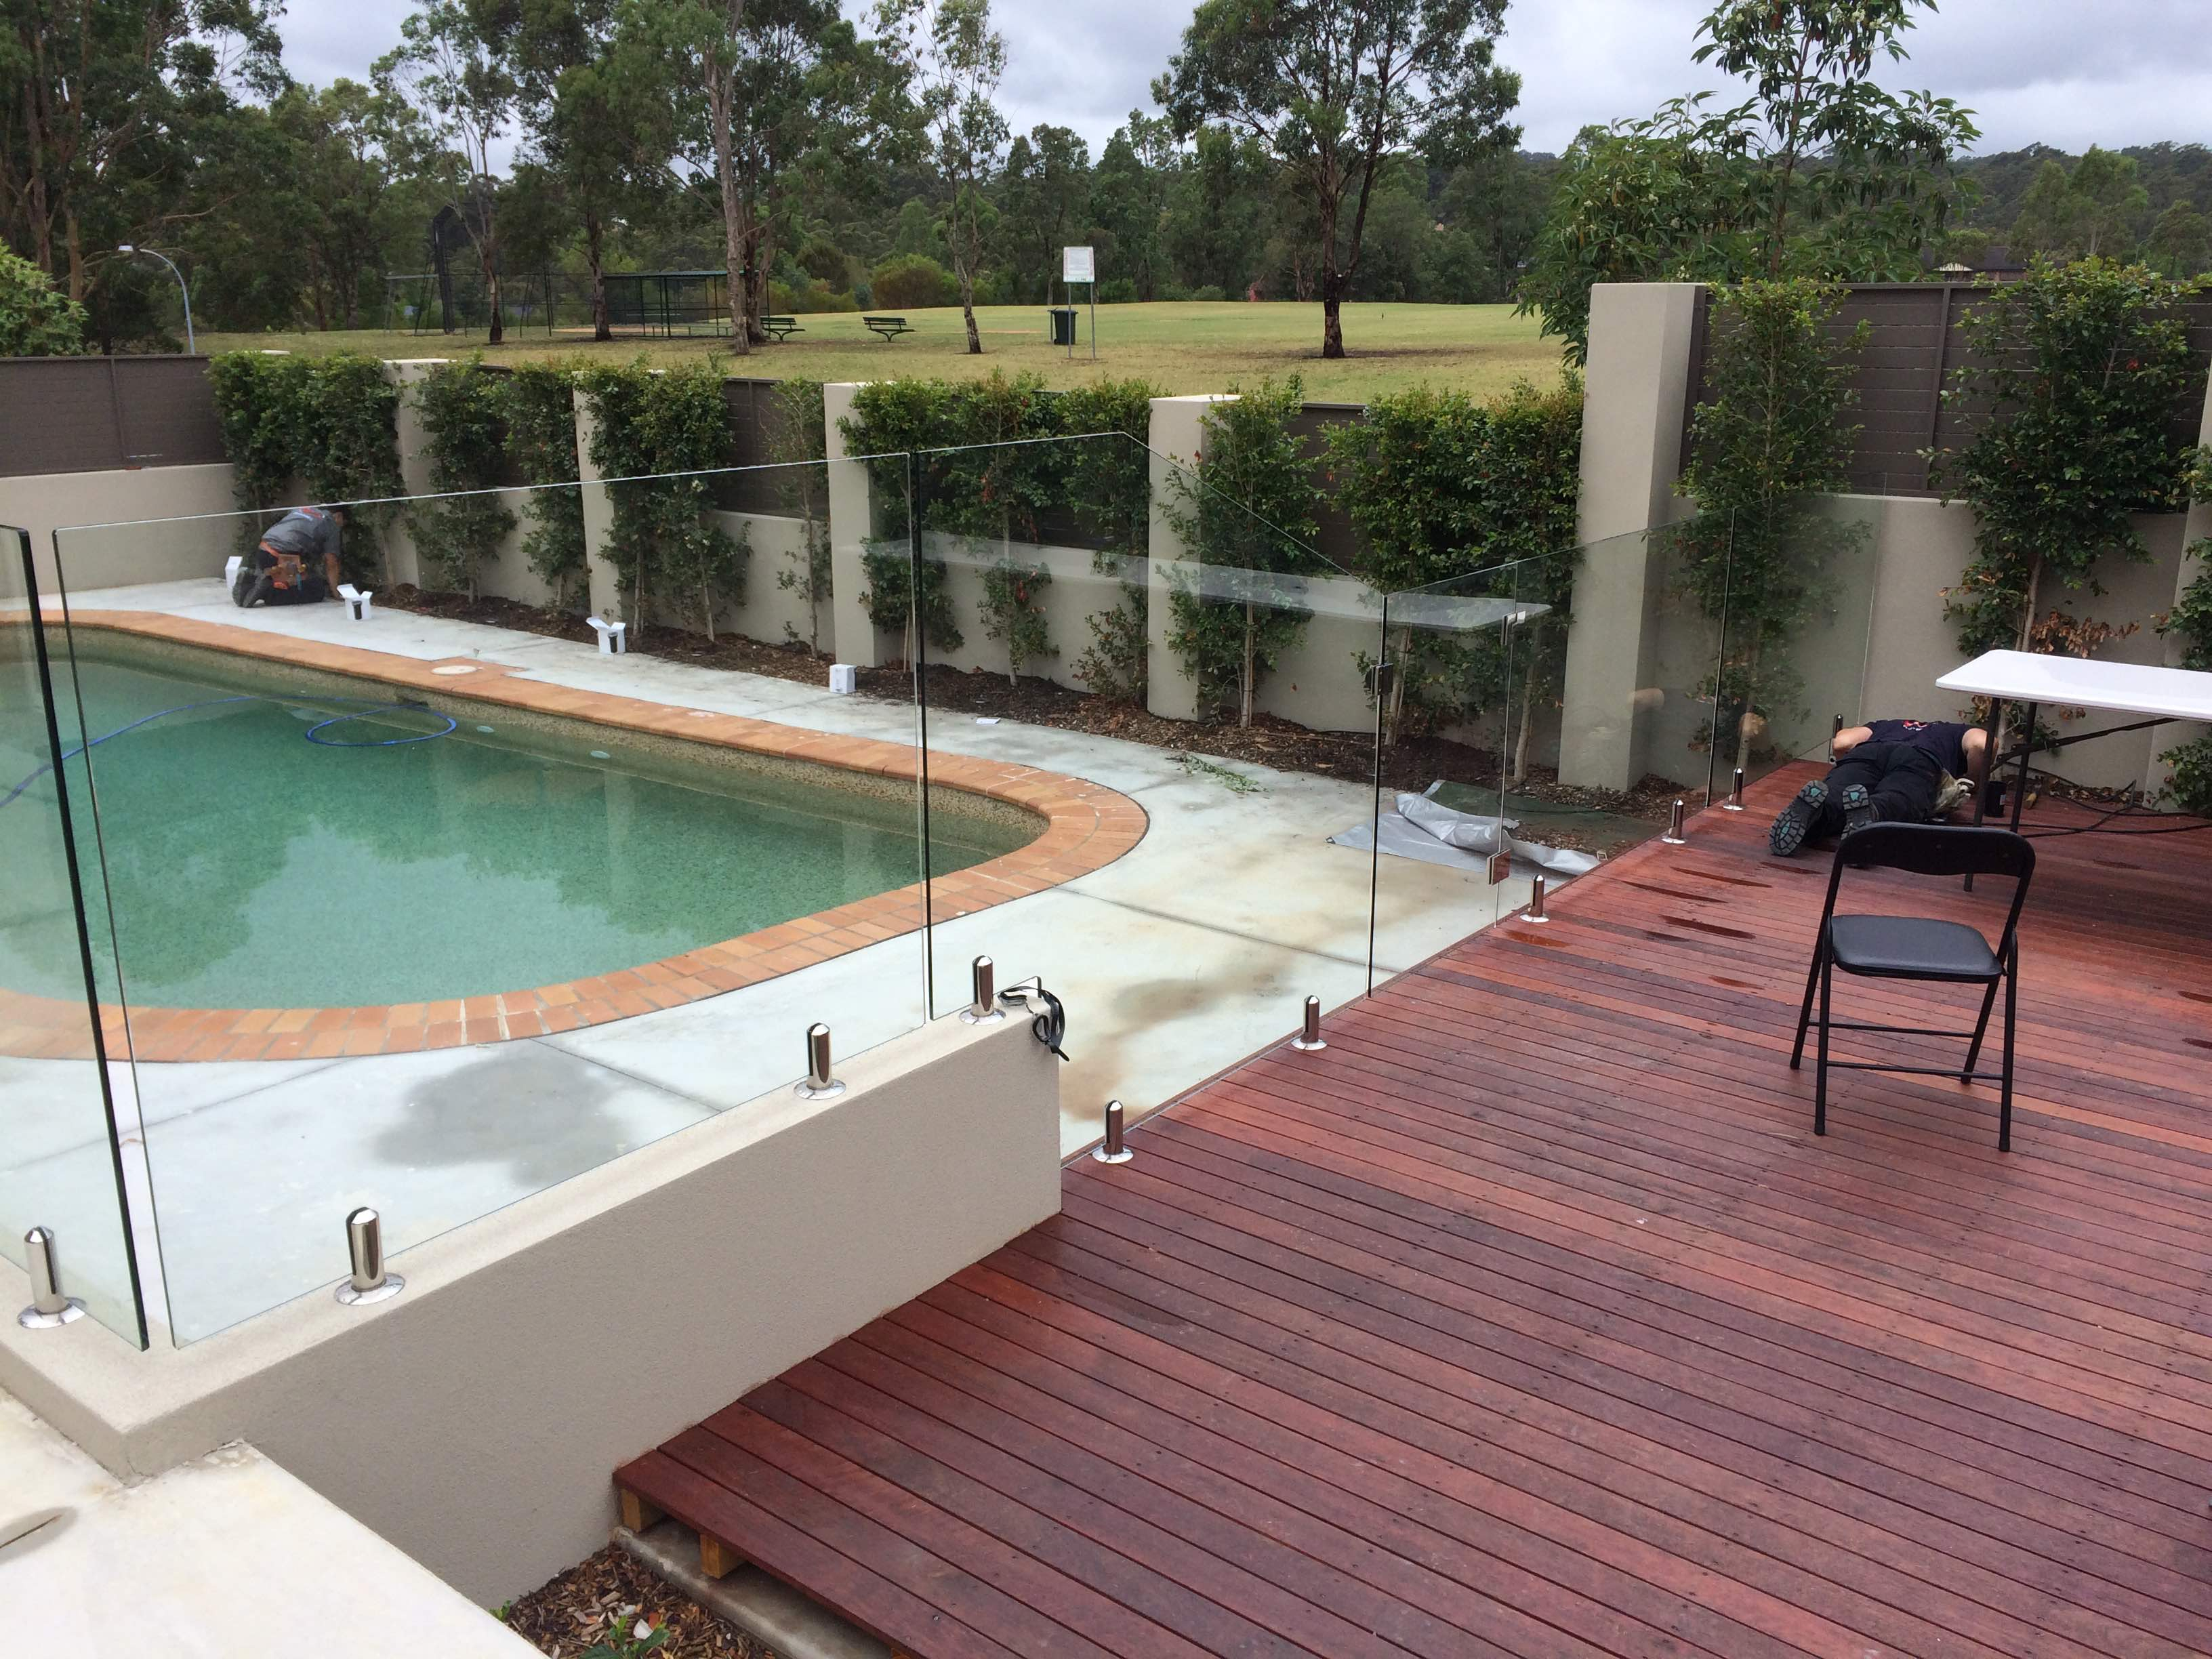 Sydwest Fencing Frameless Glass Pool Fence Installed In Castle within dimensions 3264 X 2448